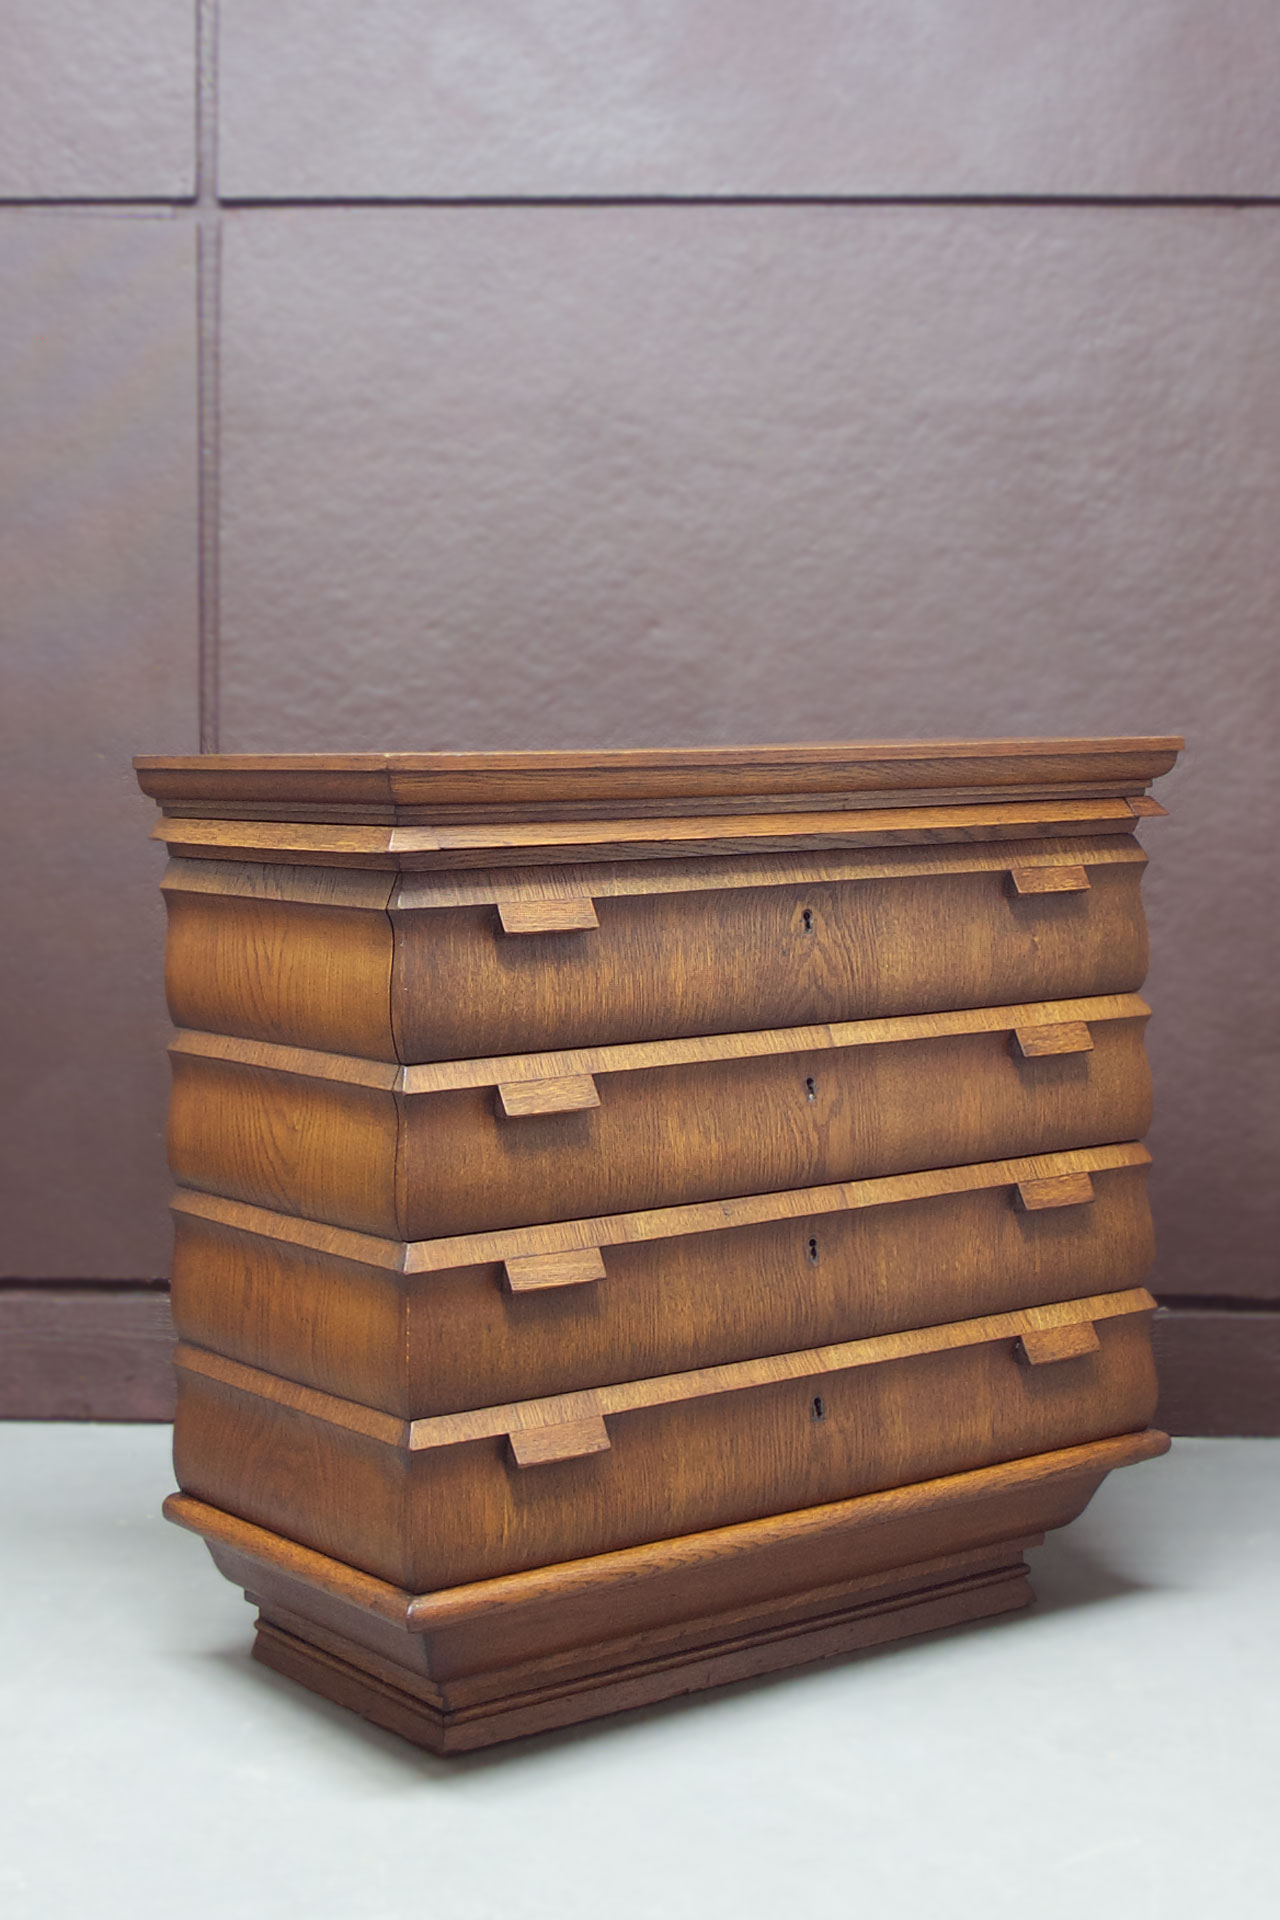 An expressionist rococo chest of drawers